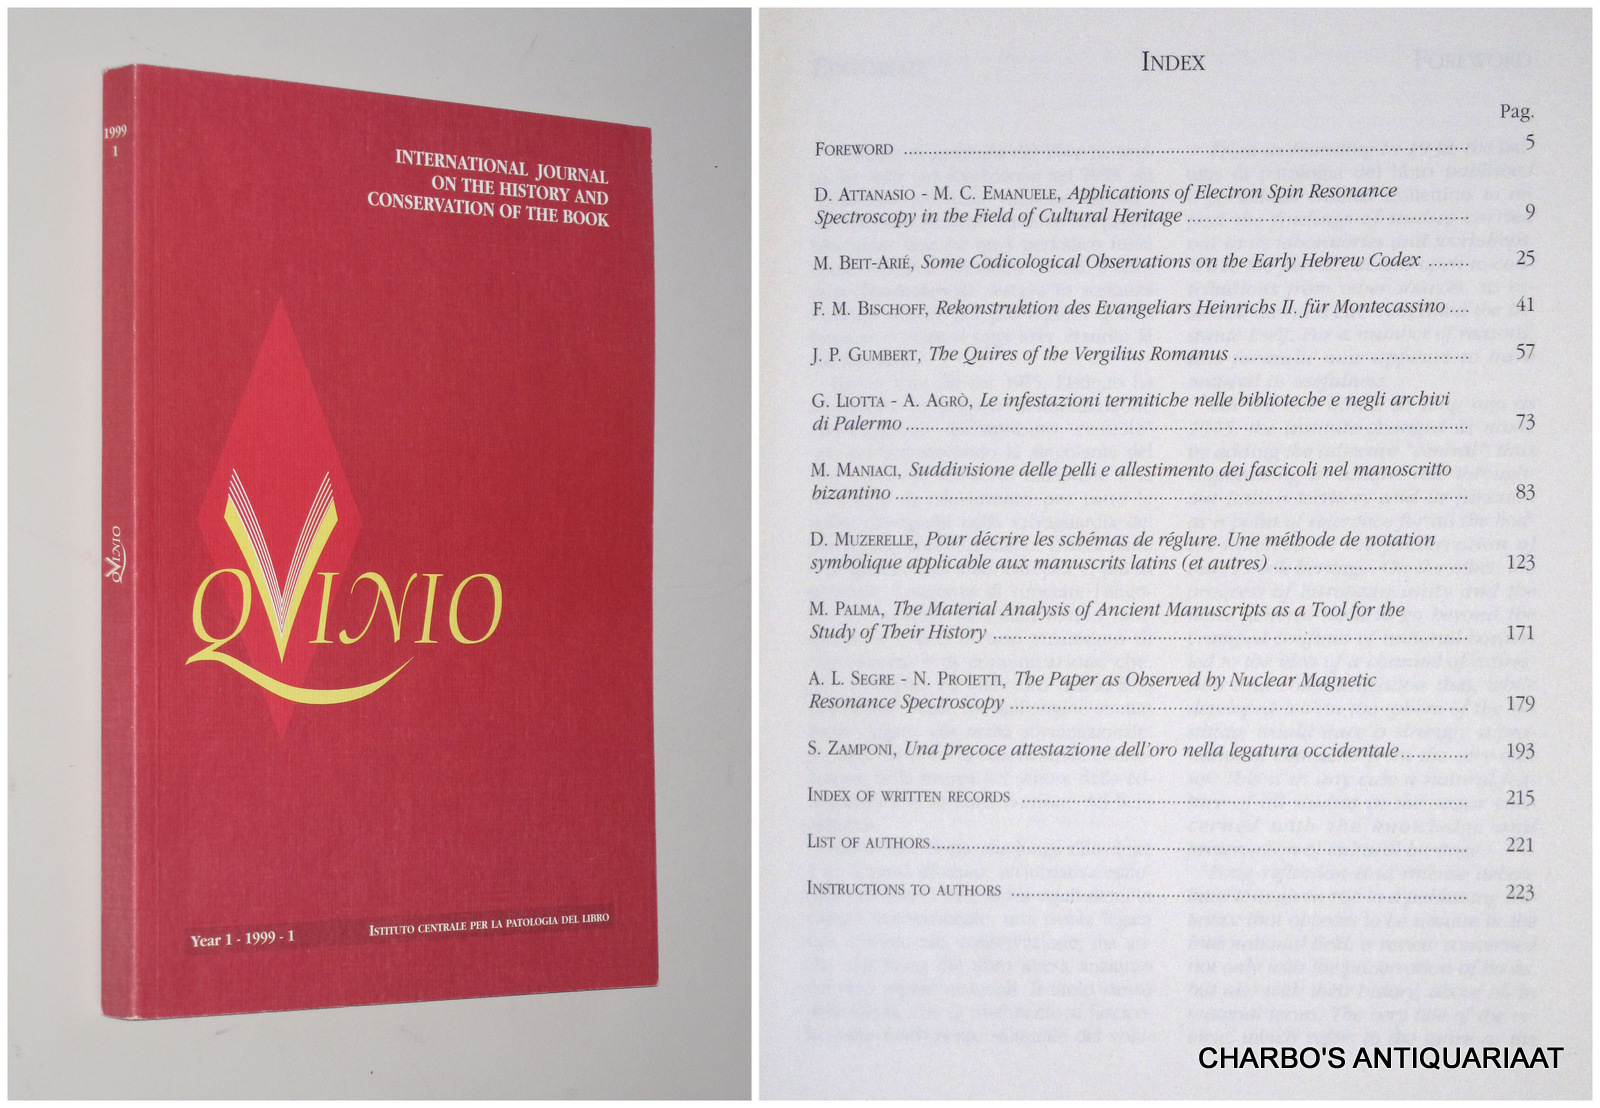 FEDERICI, CARLO (ed.), -  Qvinio [Quinio]: international journal on the history and conservation of the book. Year 1, 1999.